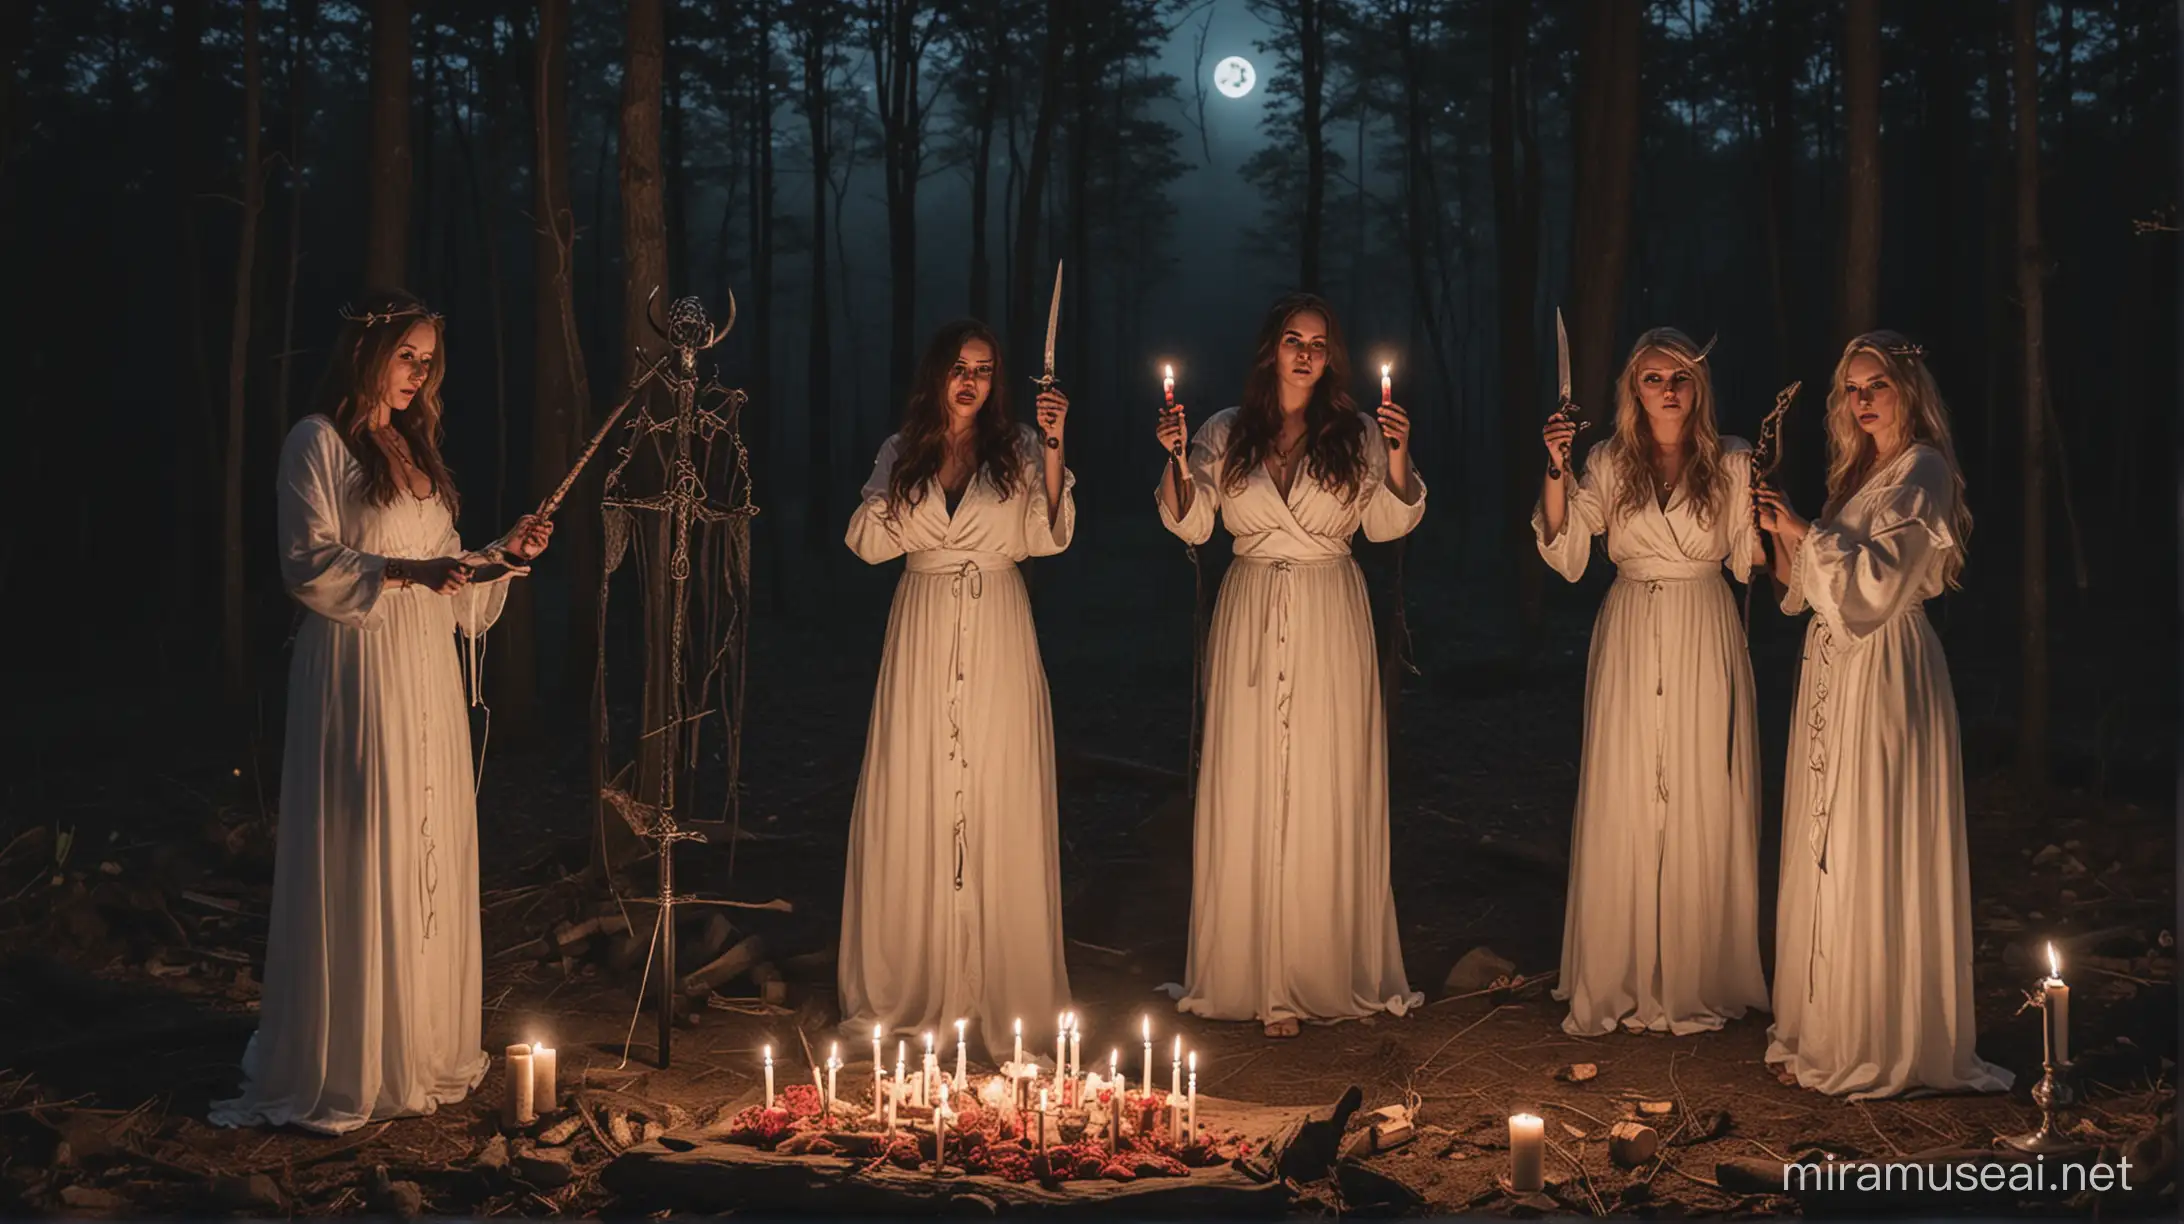 an image of 3 women ritually sacrificing a woman to the devil. They are at a  bachelorette party in the forest. The woman holding the dagger is the bride, the others her bridesmaids. This looks like a scene from a horror movie.  there are candles around and demonic symbols. Night time. Full moon. Scared Sacrifice.
